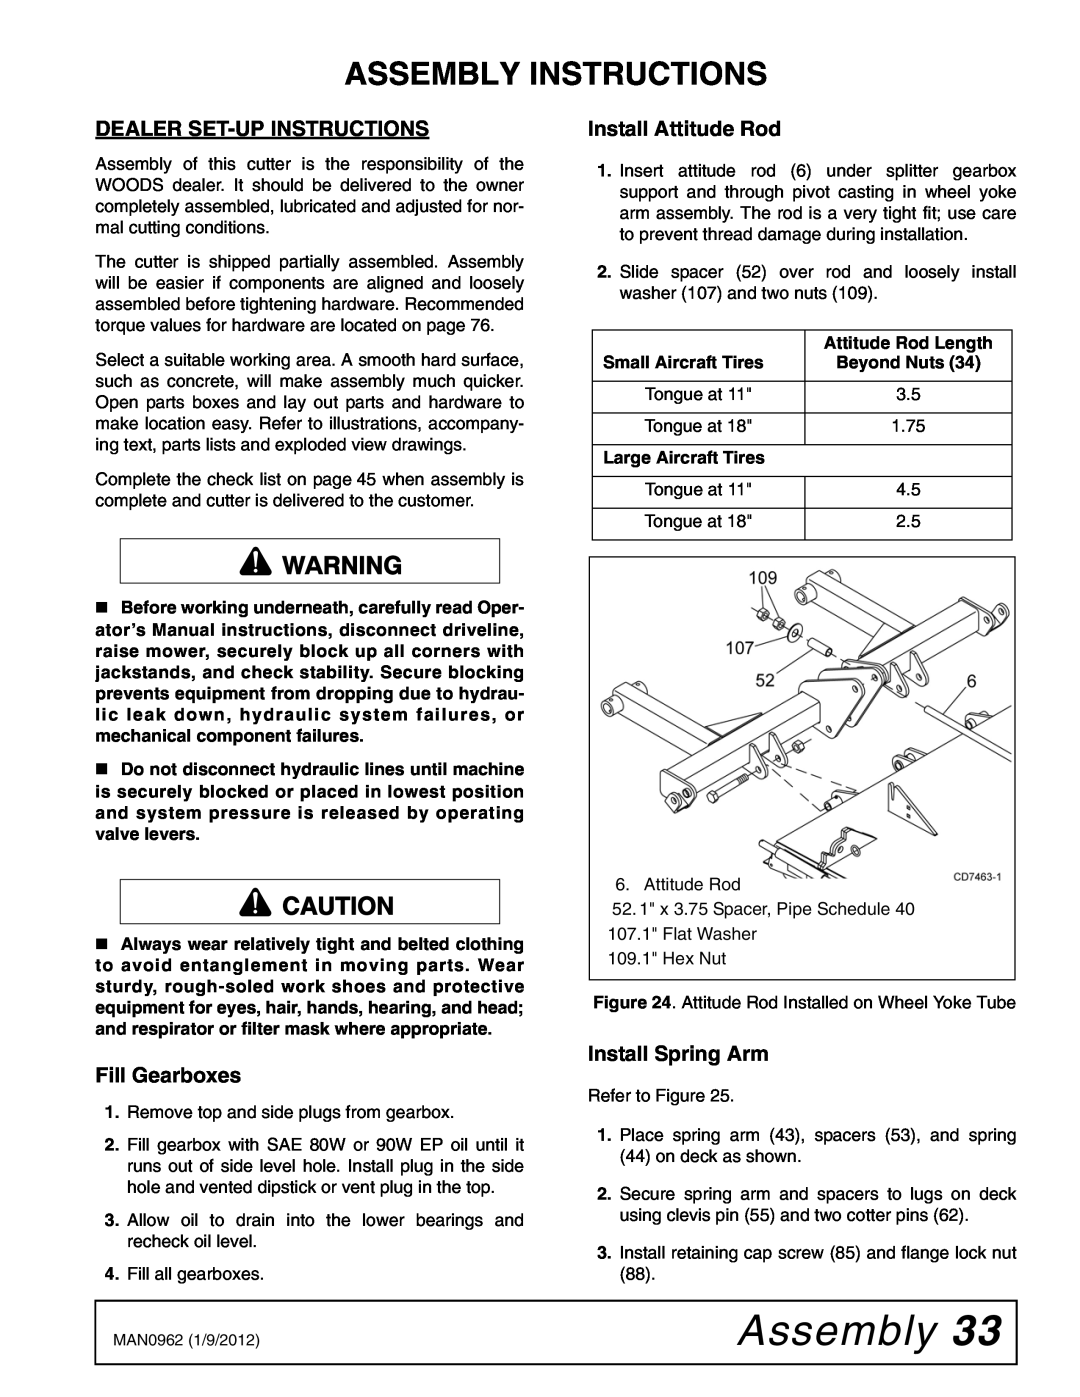 Woods Equipment BW126XQ manual Assembly Instructions, Dealer Set-Up Instructions, Fill Gearboxes, Install Attitude Rod 